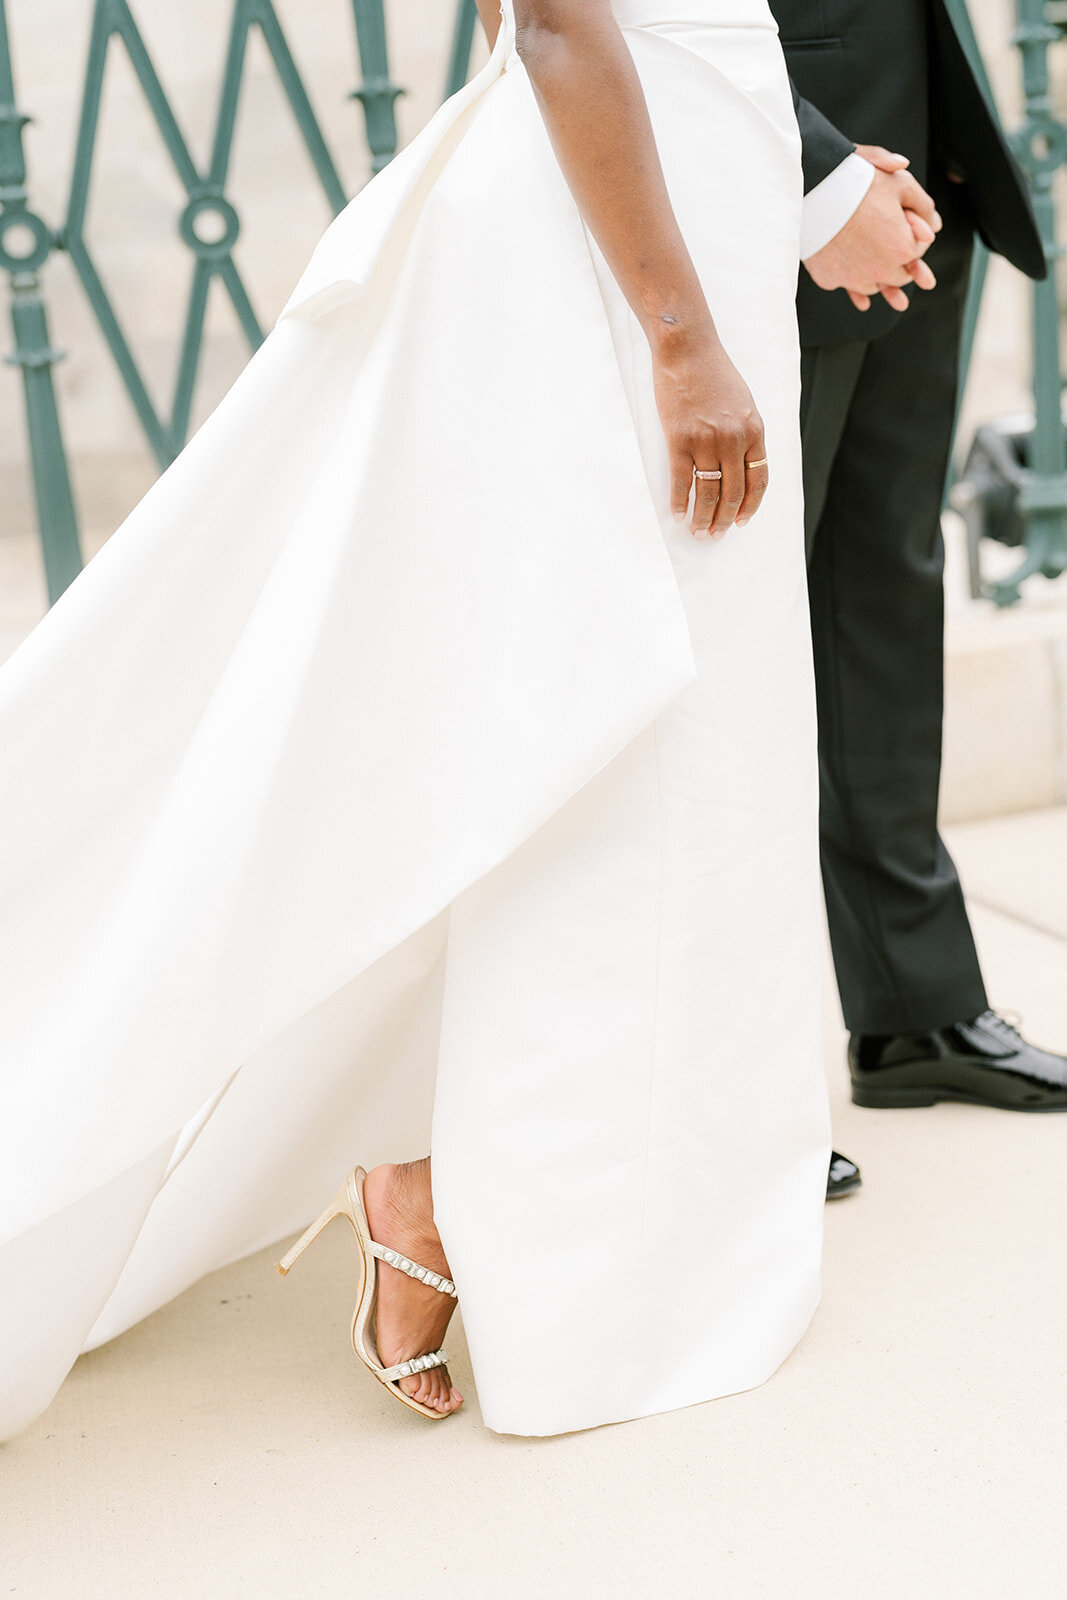 Luxury Baltimore Wedding by East Made Co and Stetten Wilson-371